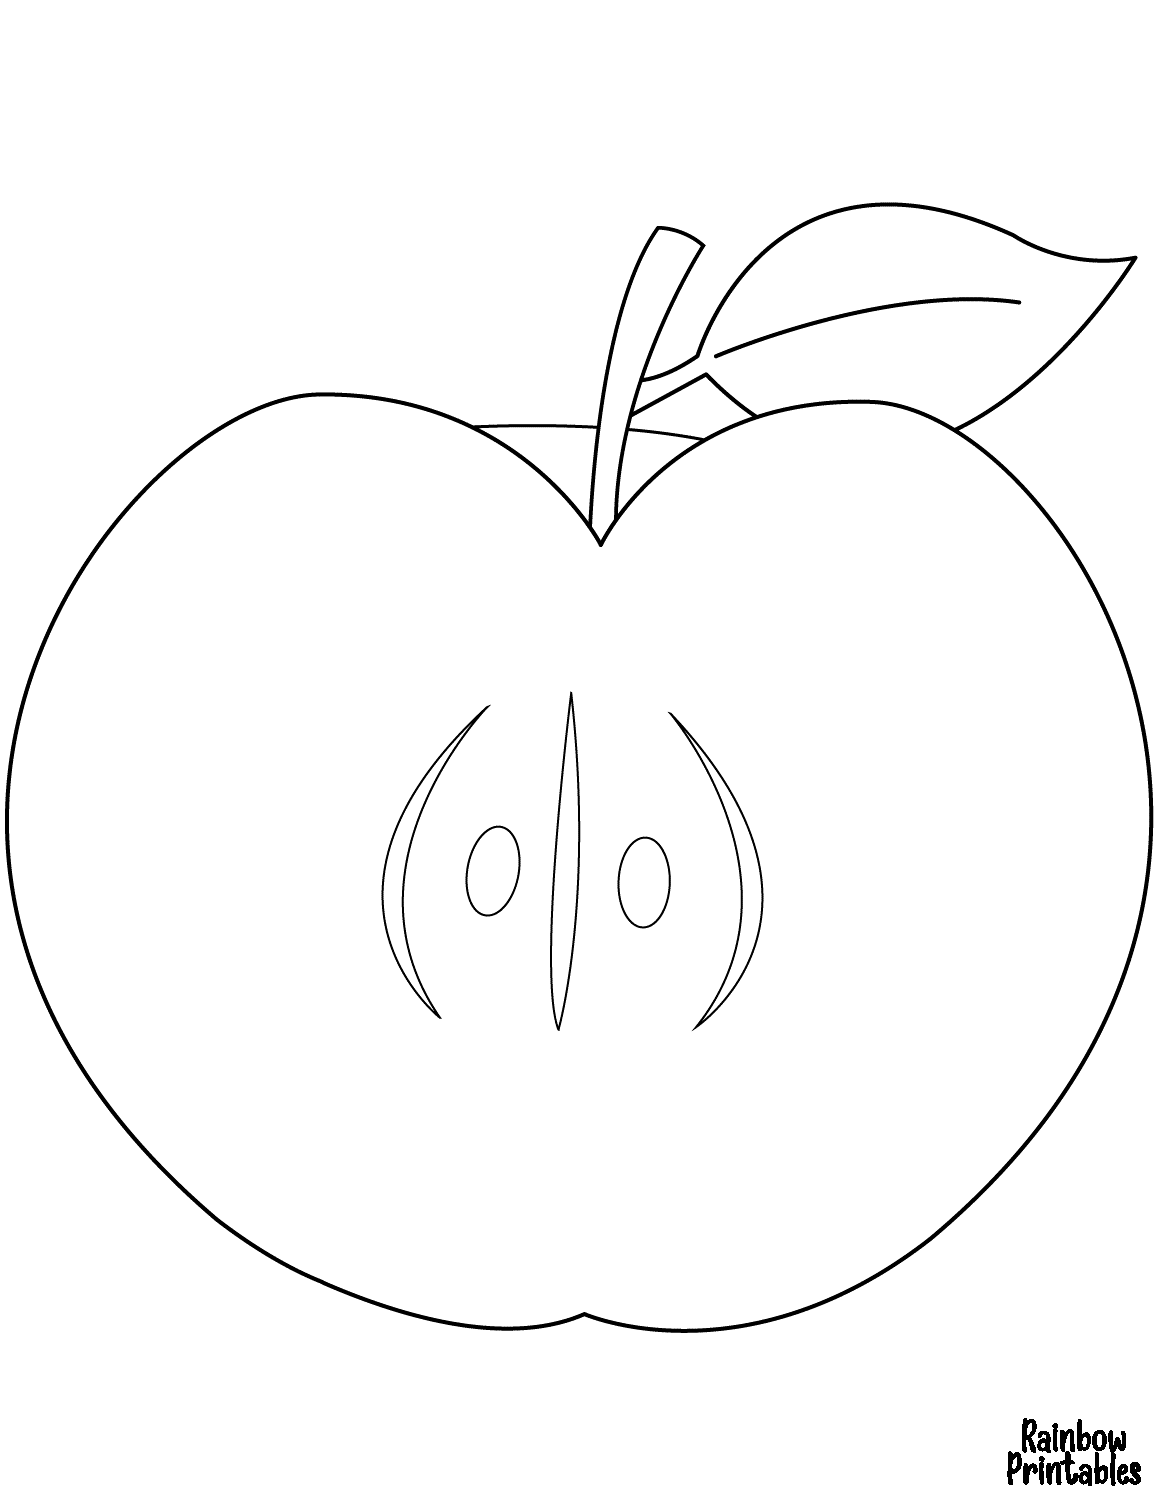 Line Drawing APPLE HALVED Coloring Pages for Kids Art Project